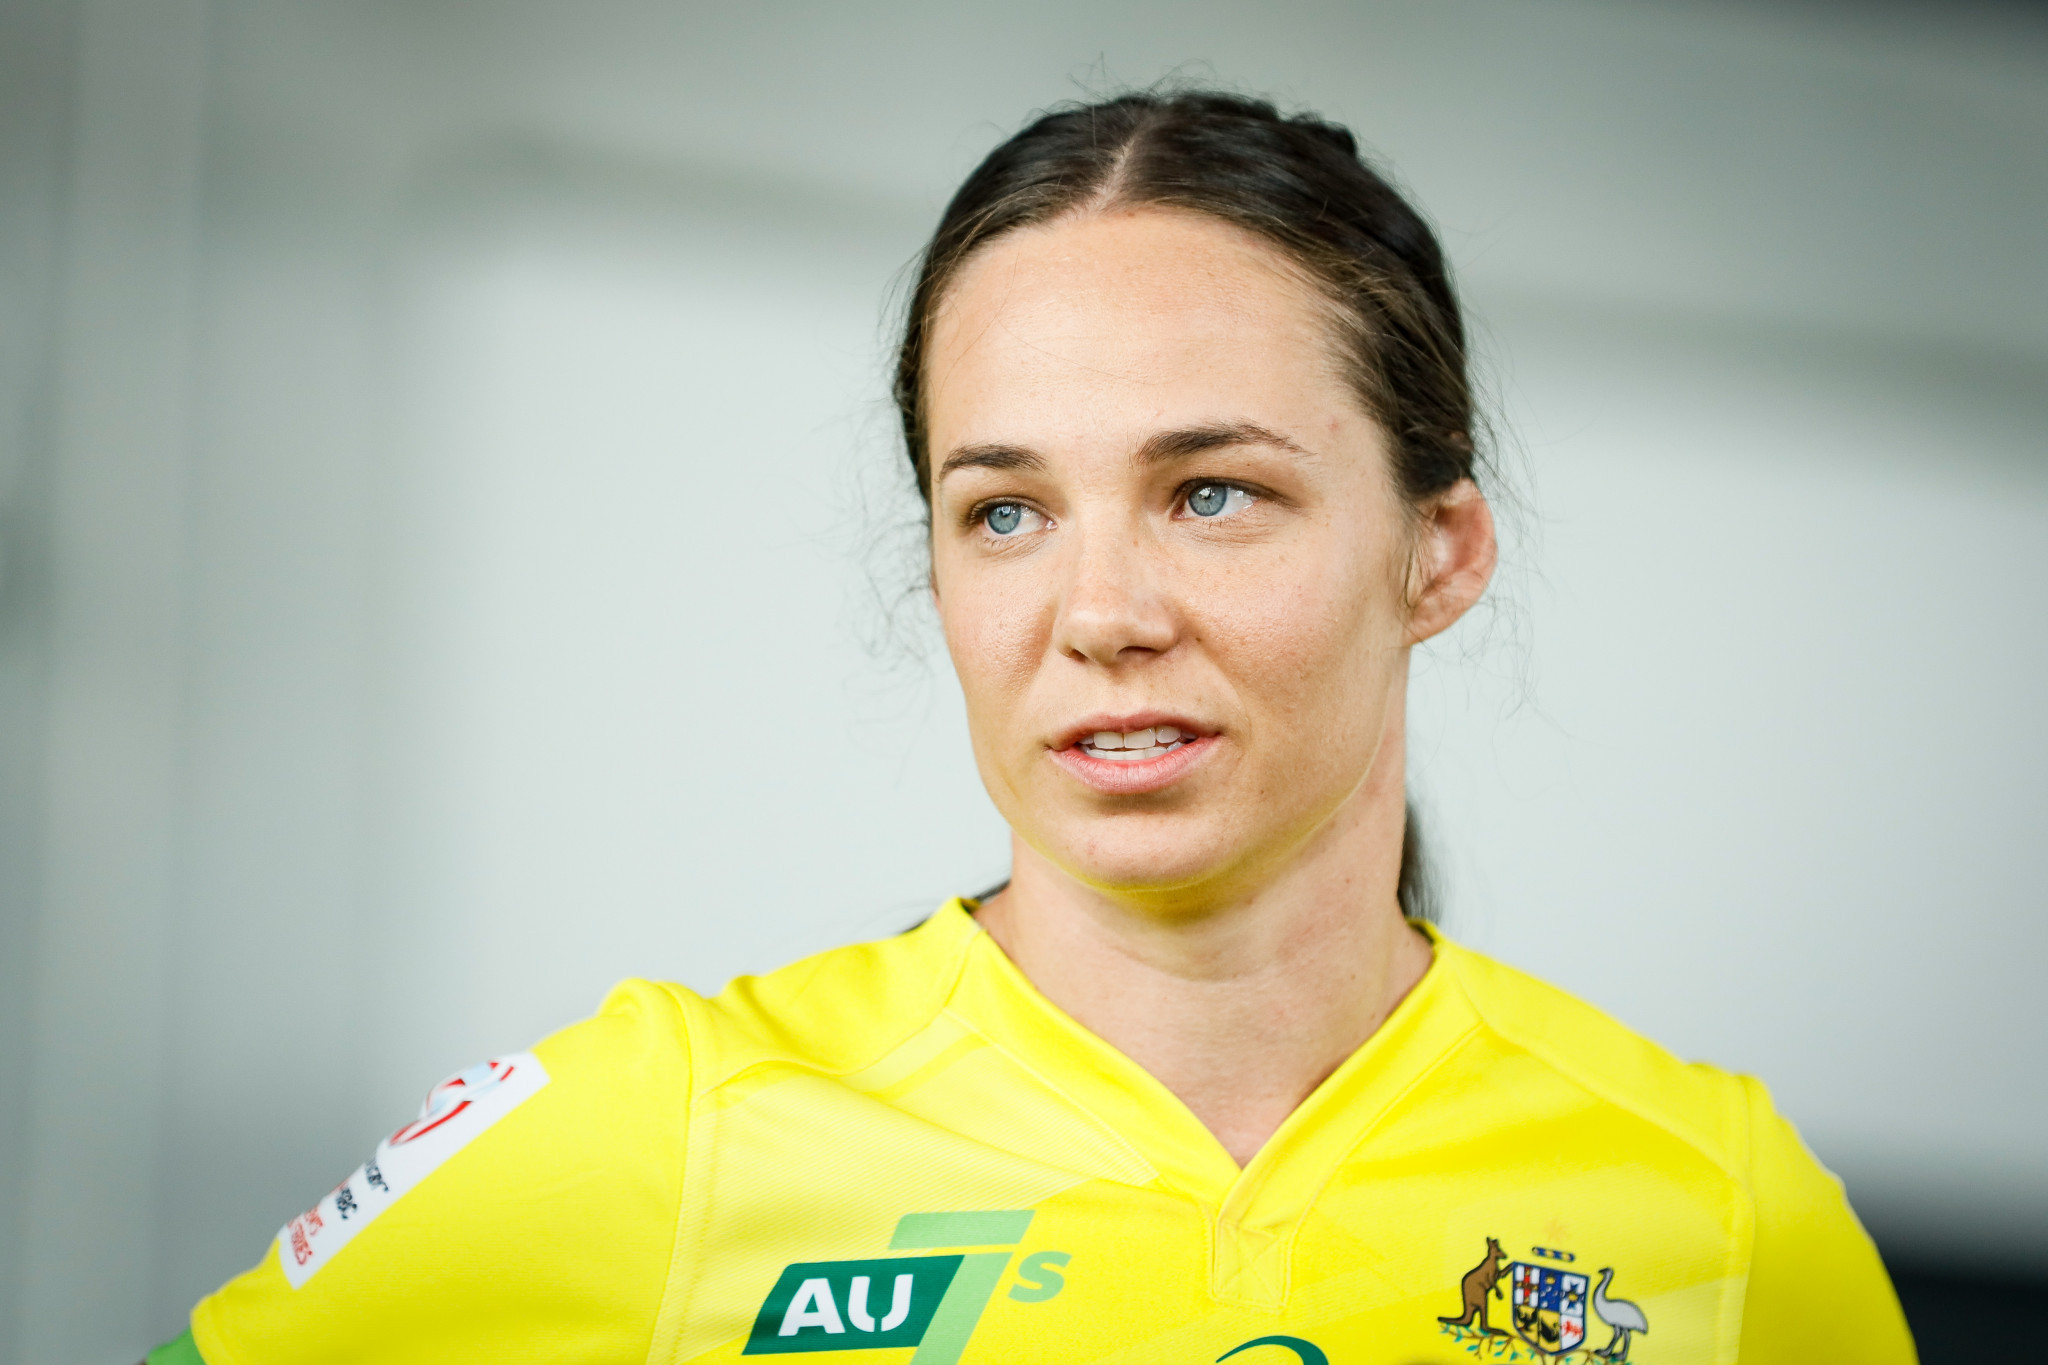 Rugby sevens player Chloe Dalton revealed she will not return to play in the AFLW in order to prepare for Tokyo 2020 ©Getty Images